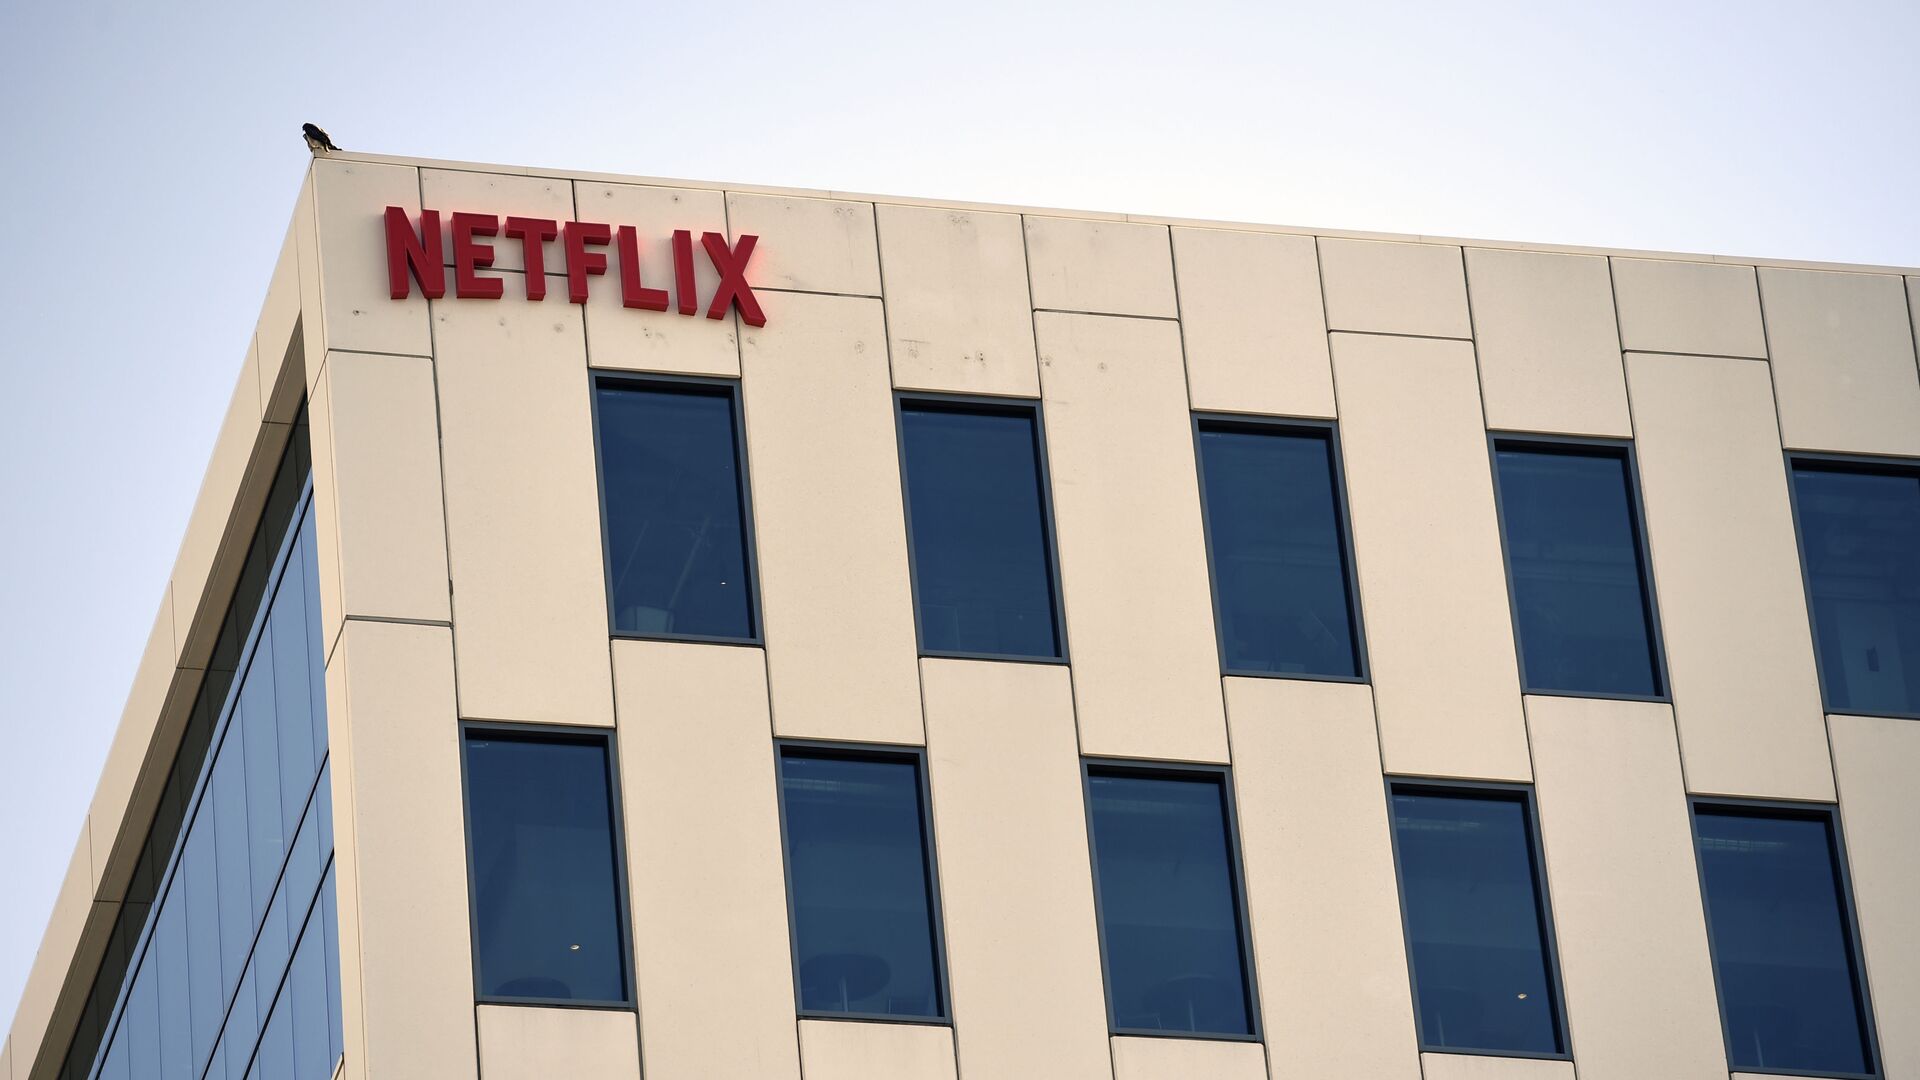 Netflix headquarters in the Hollywood section of Los Angeles is pictured, Monday, May 4, 2020 - اسپوتنیک افغانستان  , 1920, 07.09.2022